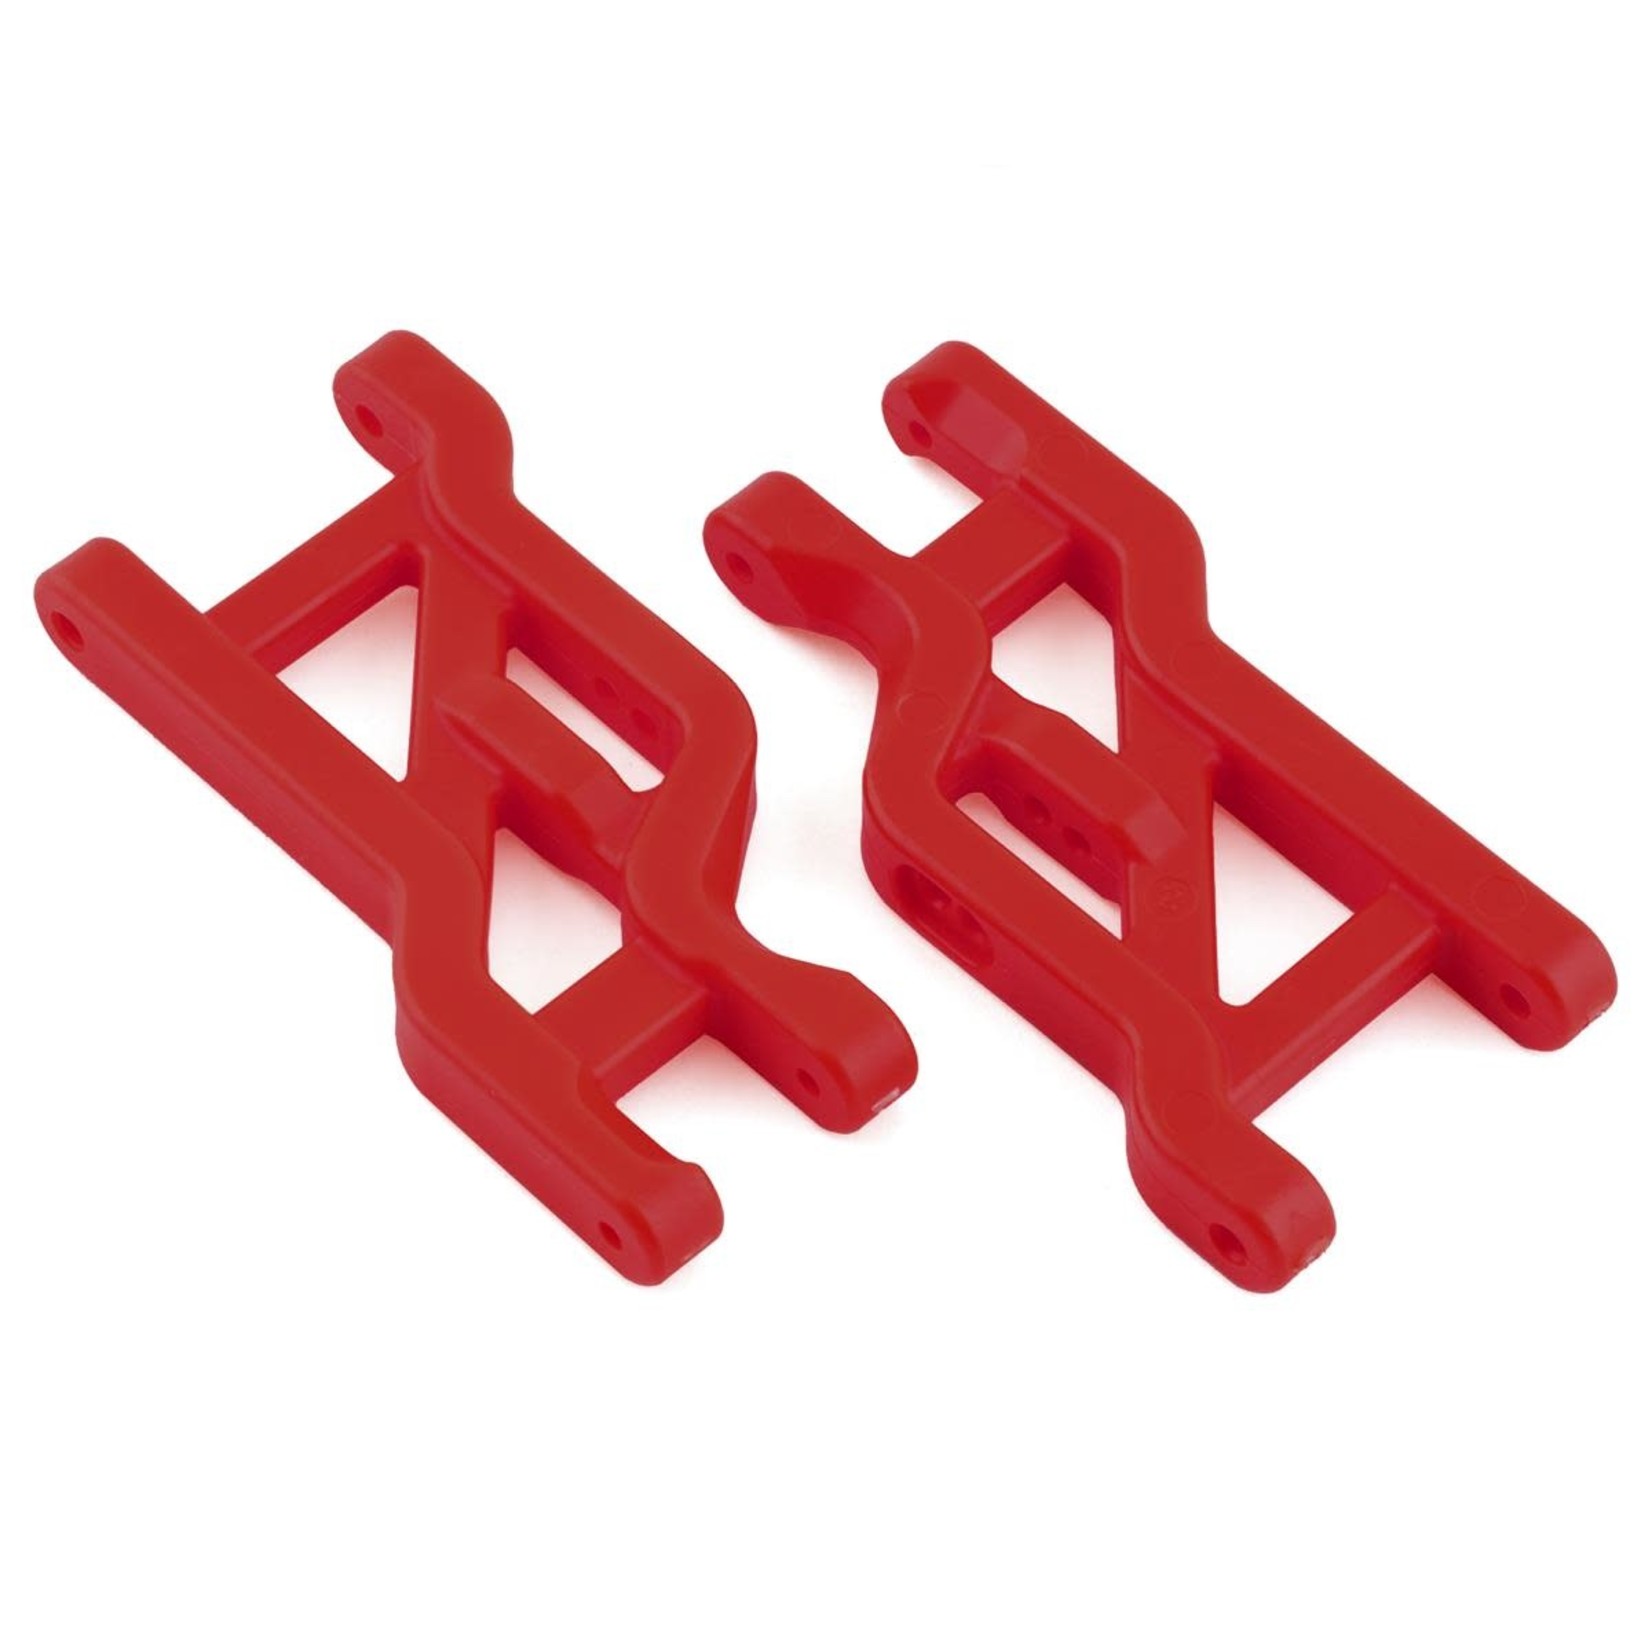 Traxxas Traxxas Front Heavy Duty Suspension Arms (Red) (2) #2531R